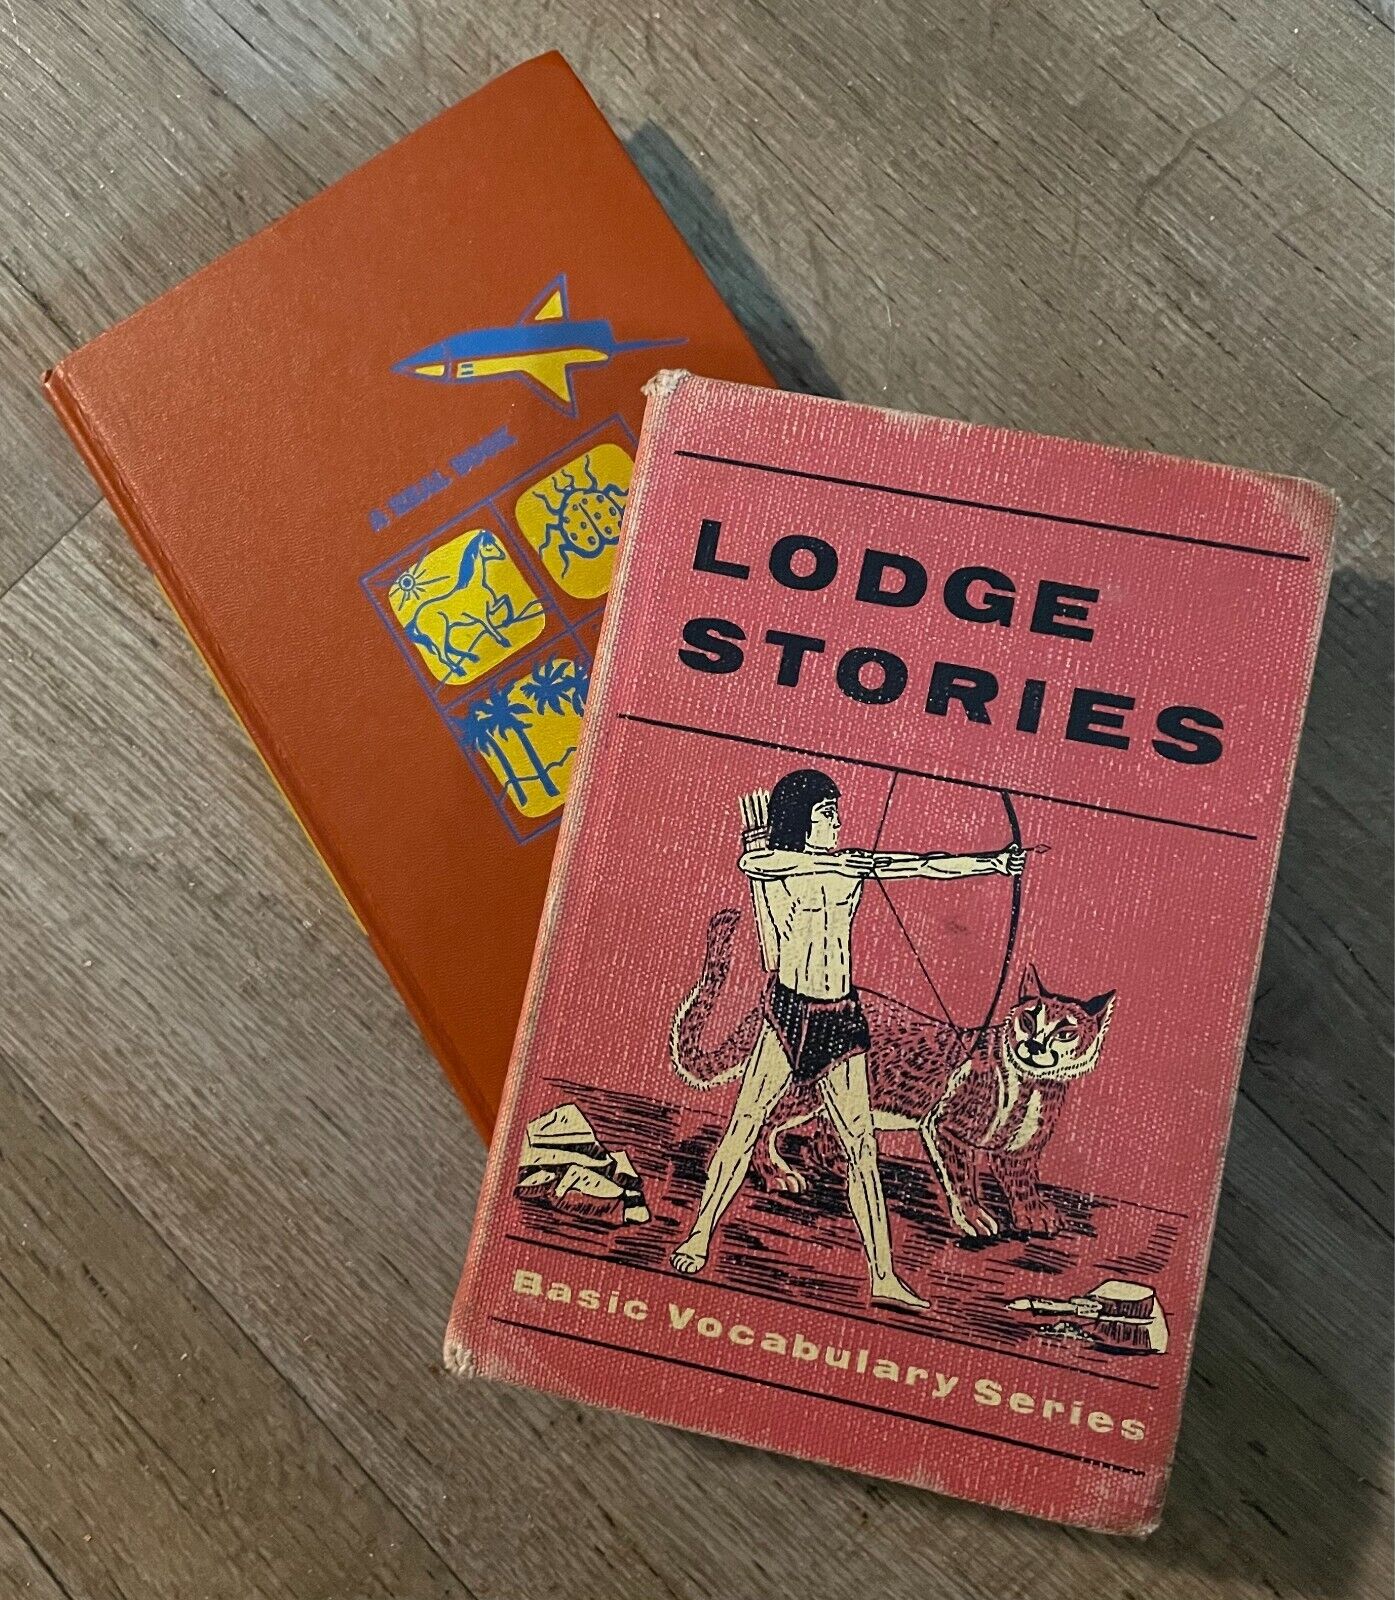 2 SWEET VINTAGE NATIVE AMERICAN BOOKS-LODGE STORIES; THE REAL BOOK ABOUT INDIANS